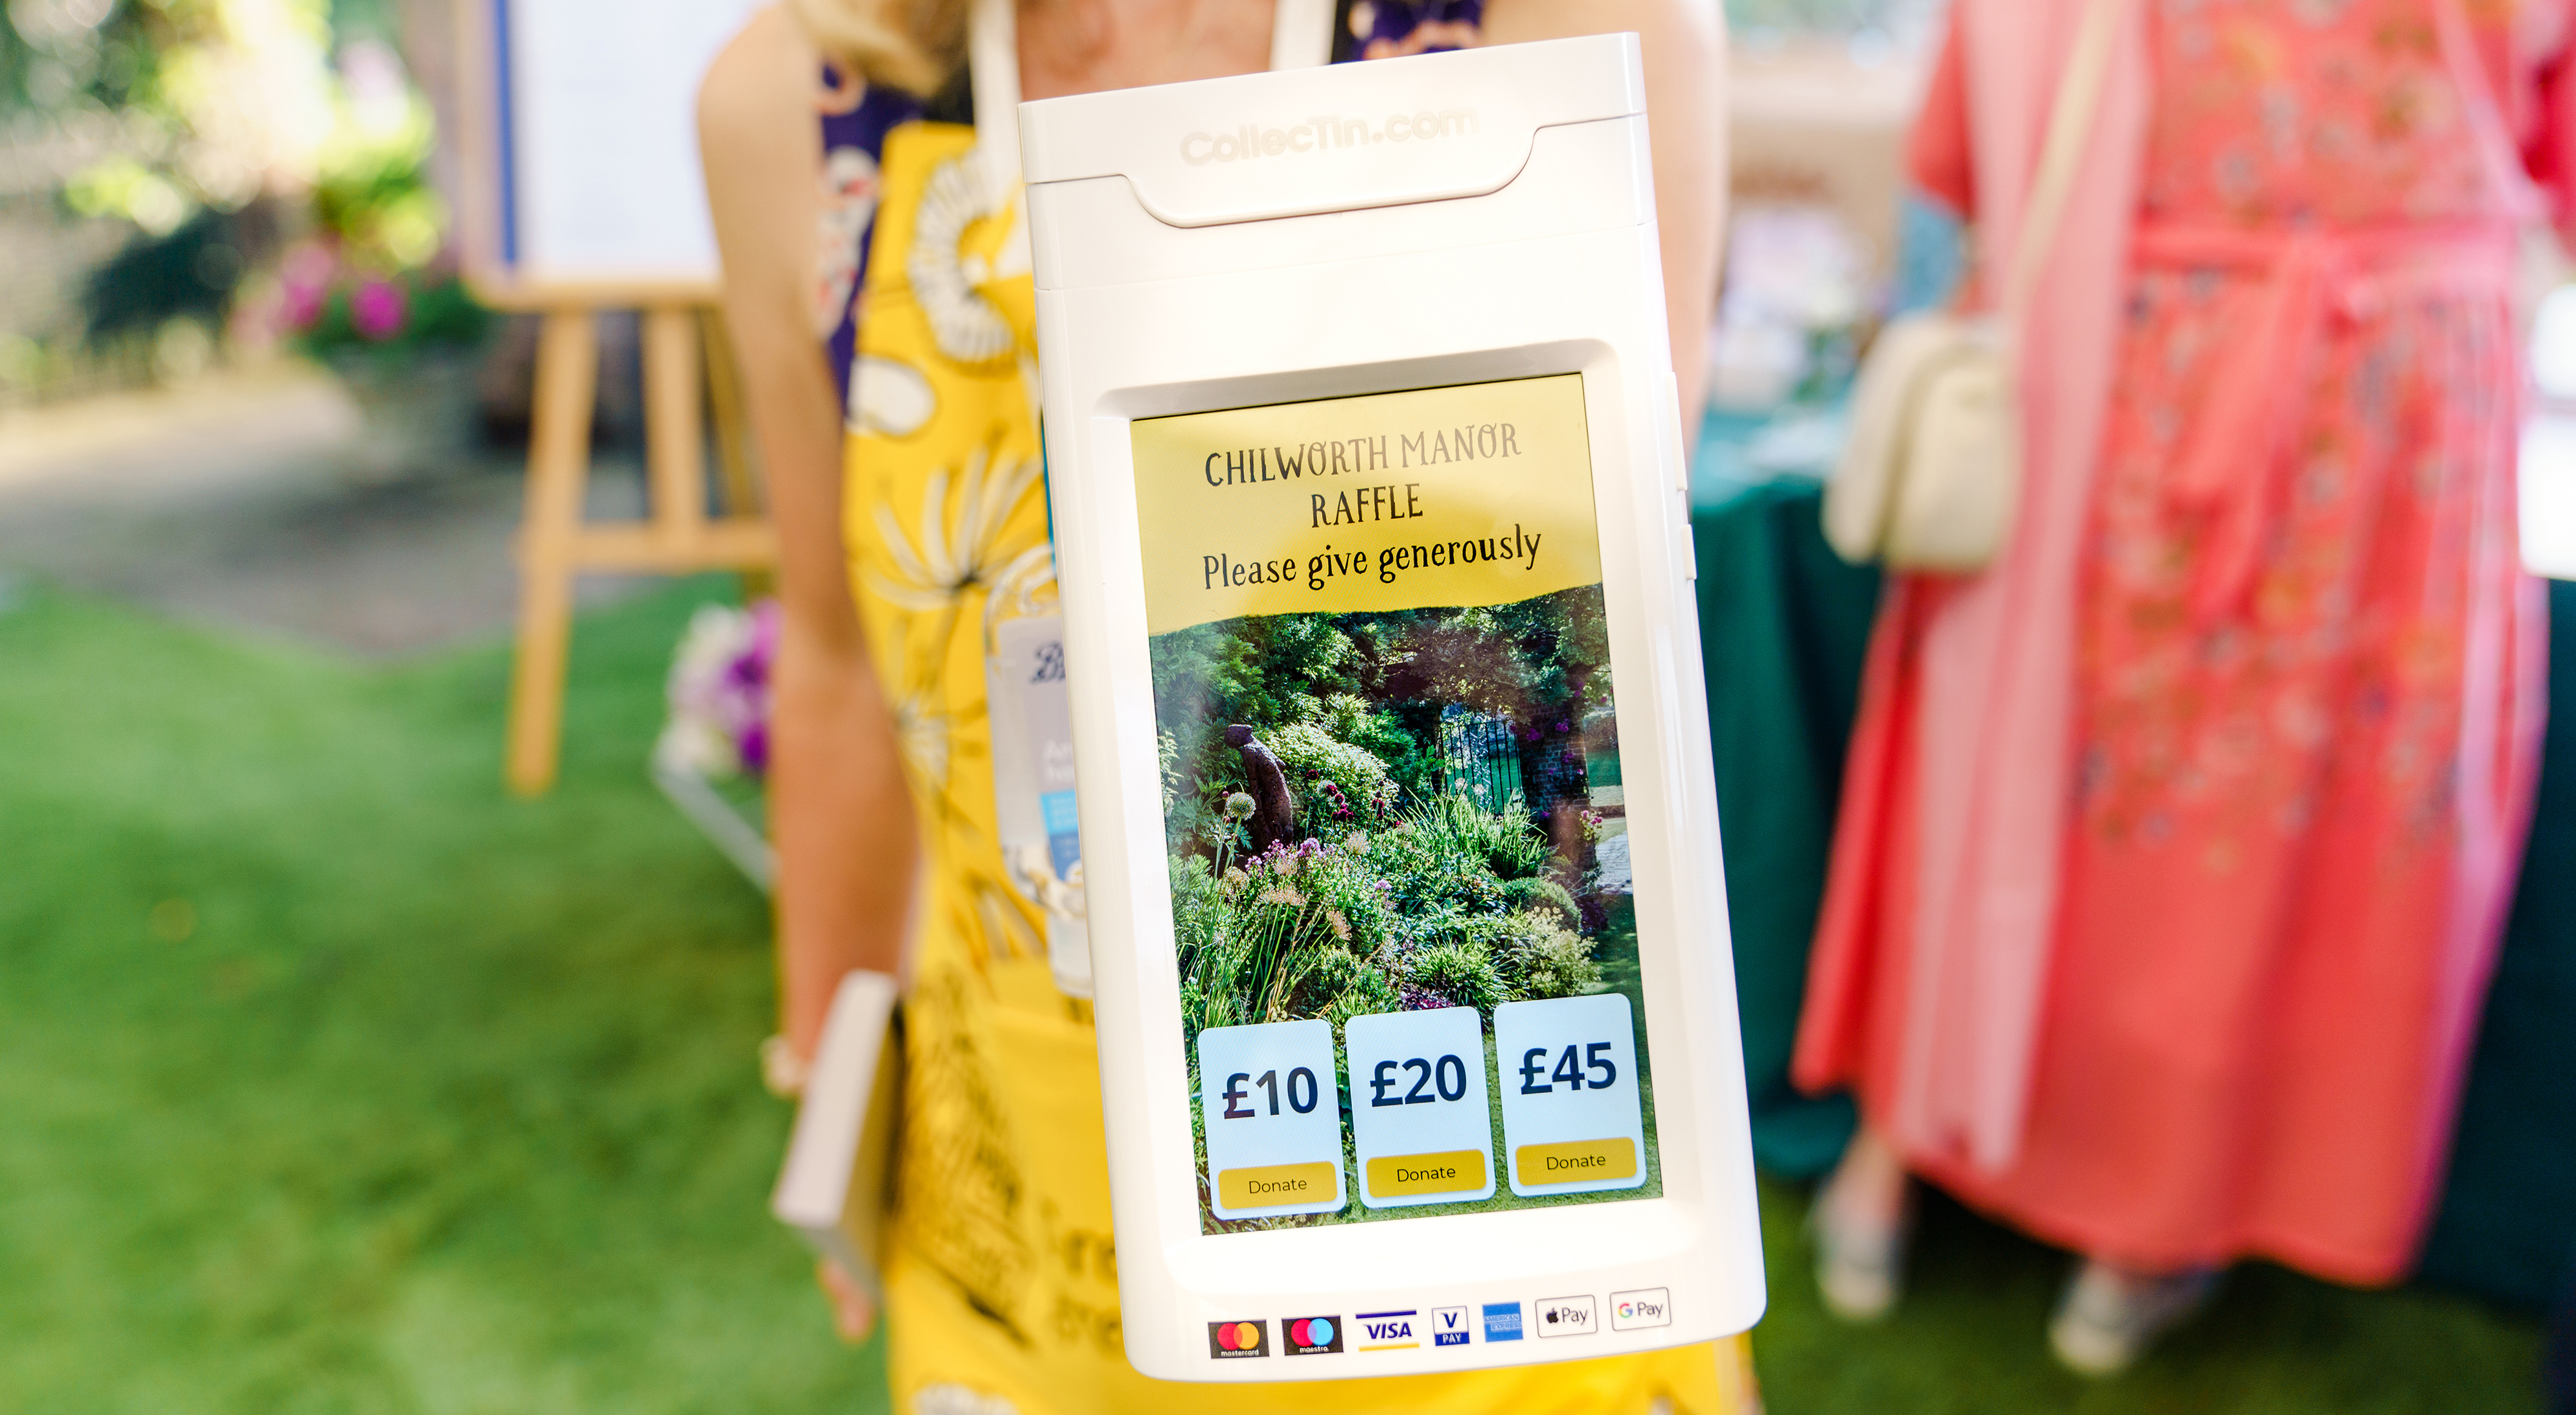 National Garden Scheme Leads the Digitalisation of Charity, in Partnership with SumUp